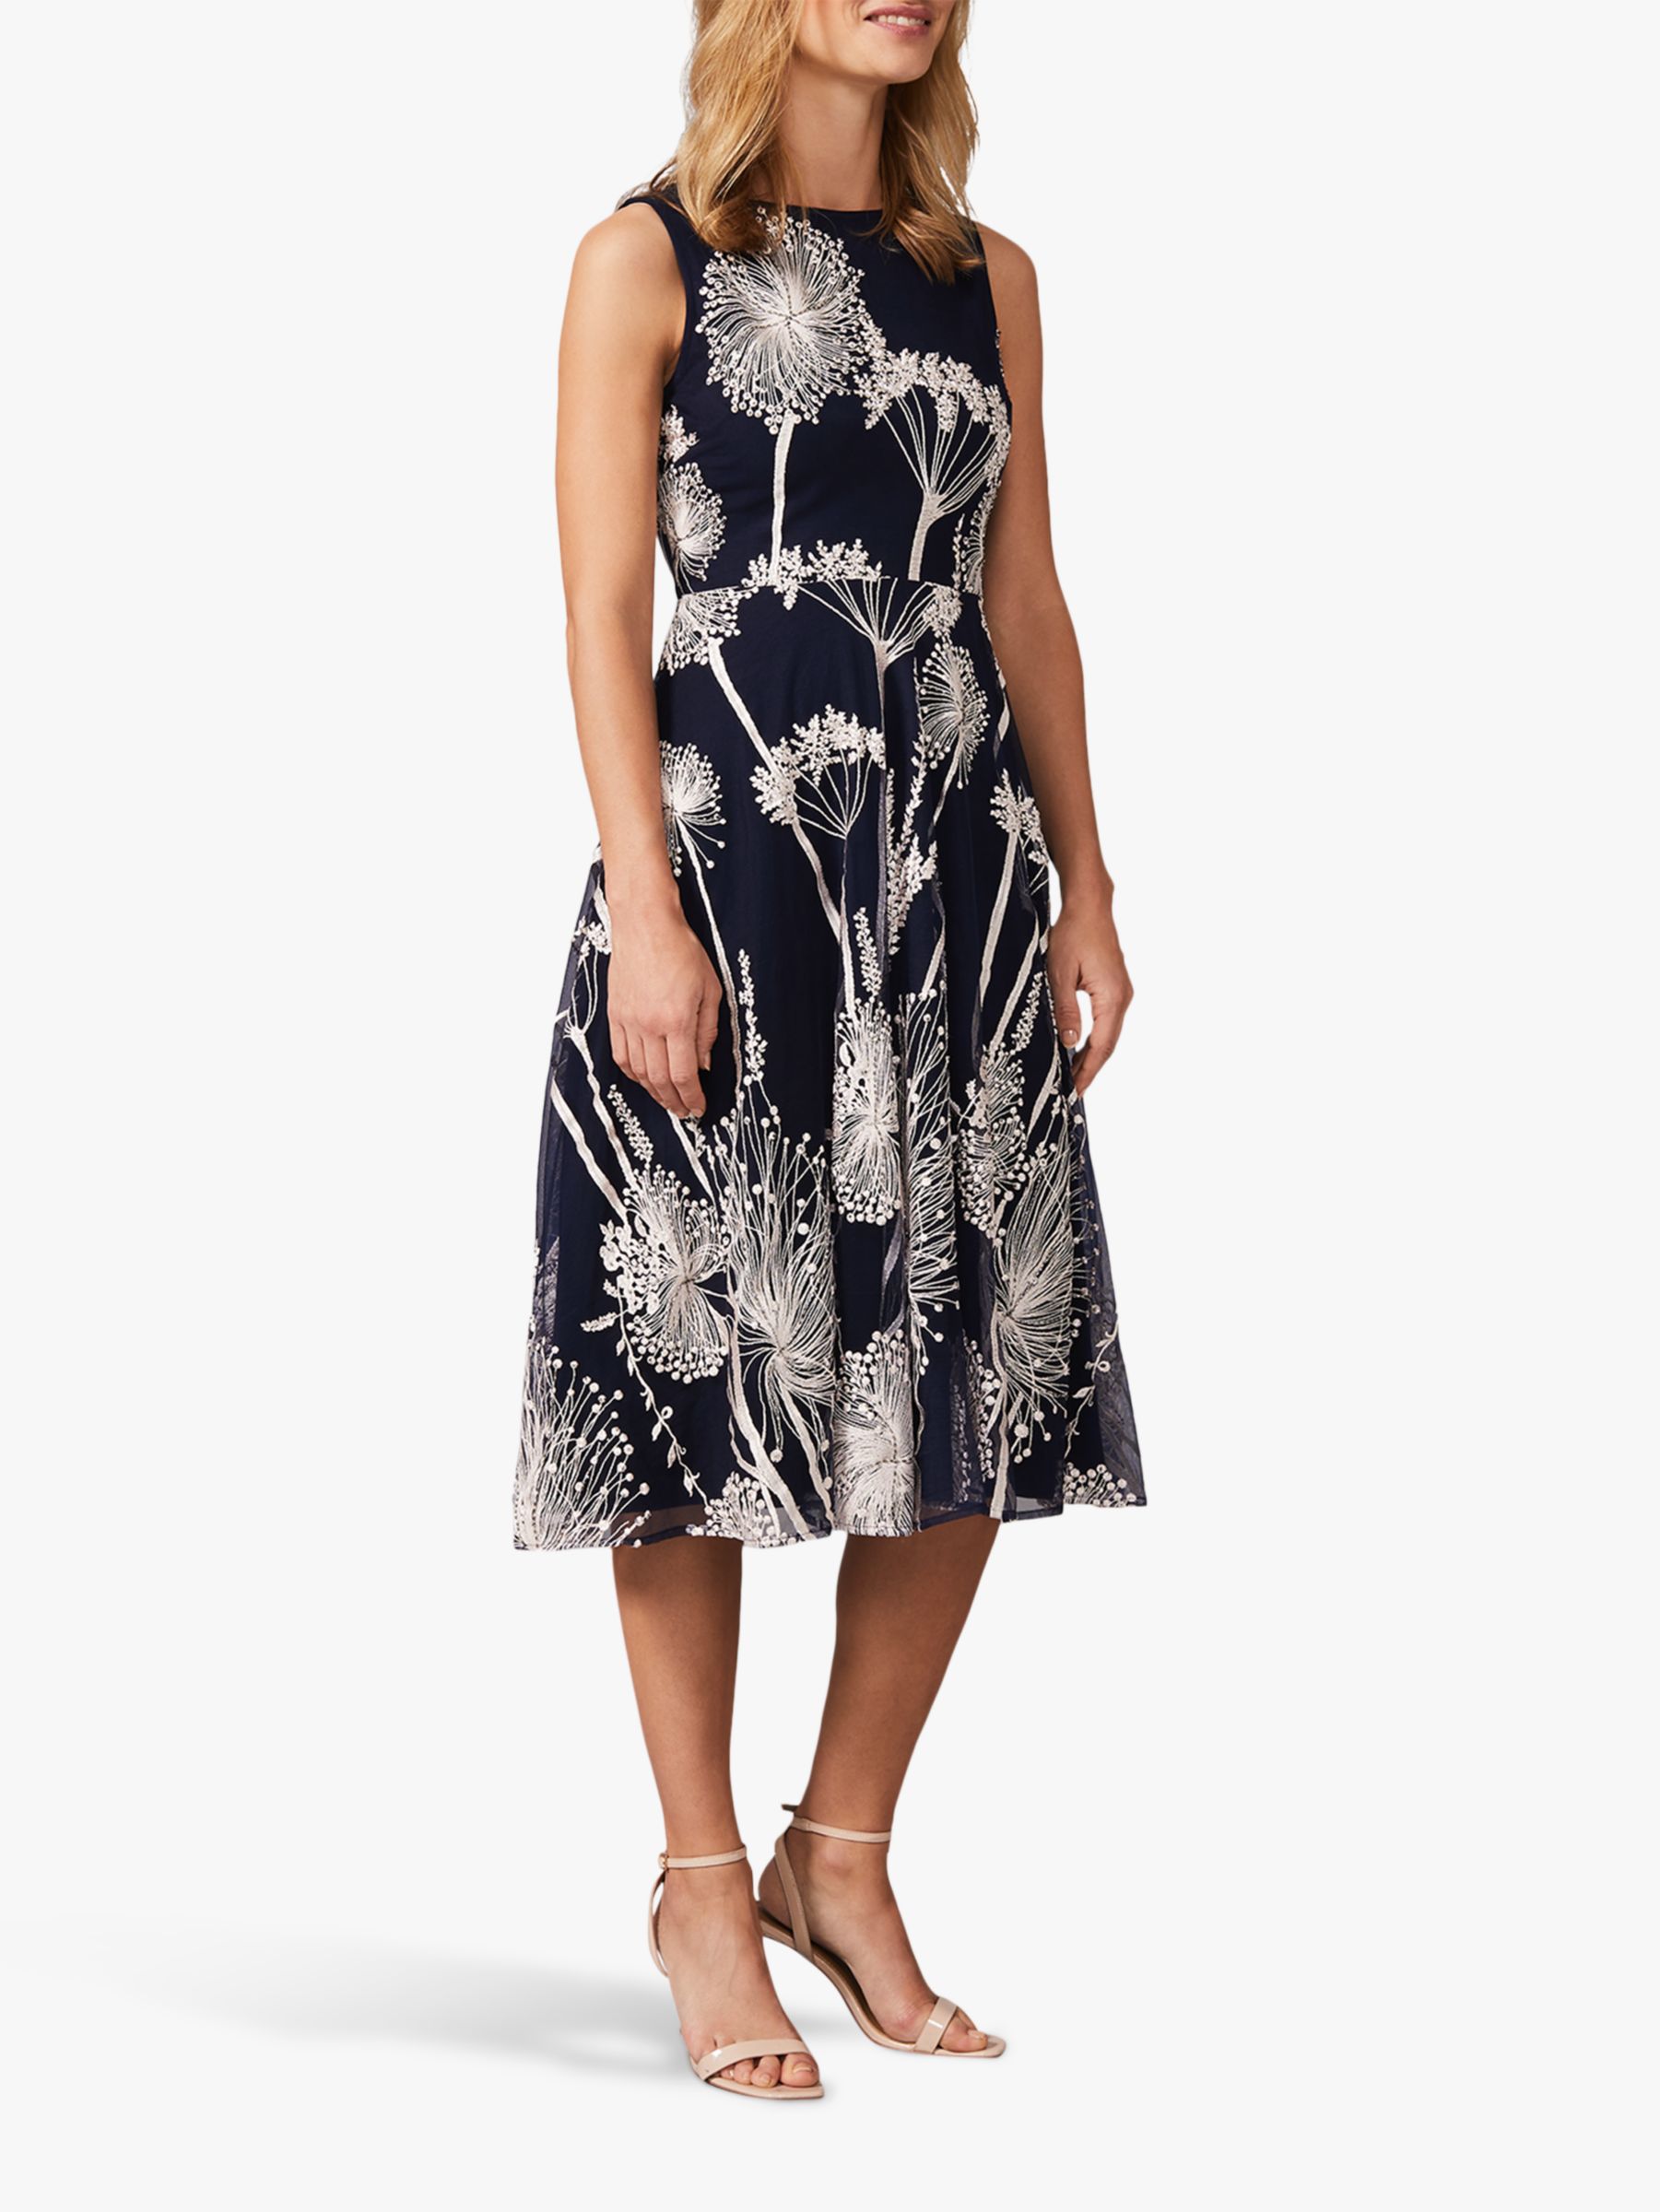 Phase Eight Franchesca Floral Dress, Navy/Oyster